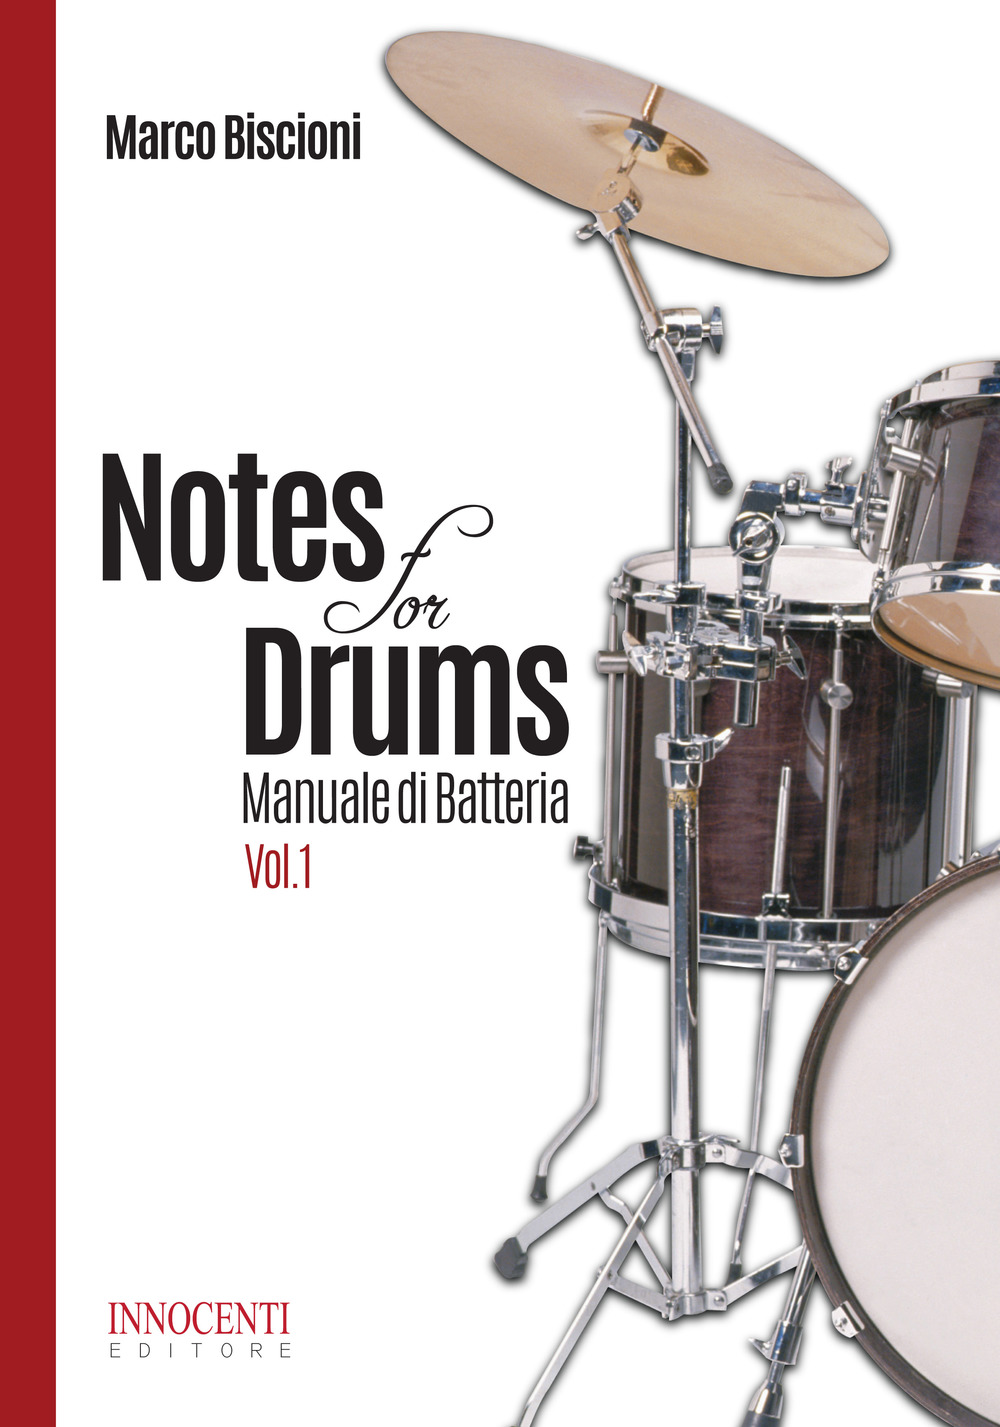 Notes for drums. Manuale di batteria. Vol. 1